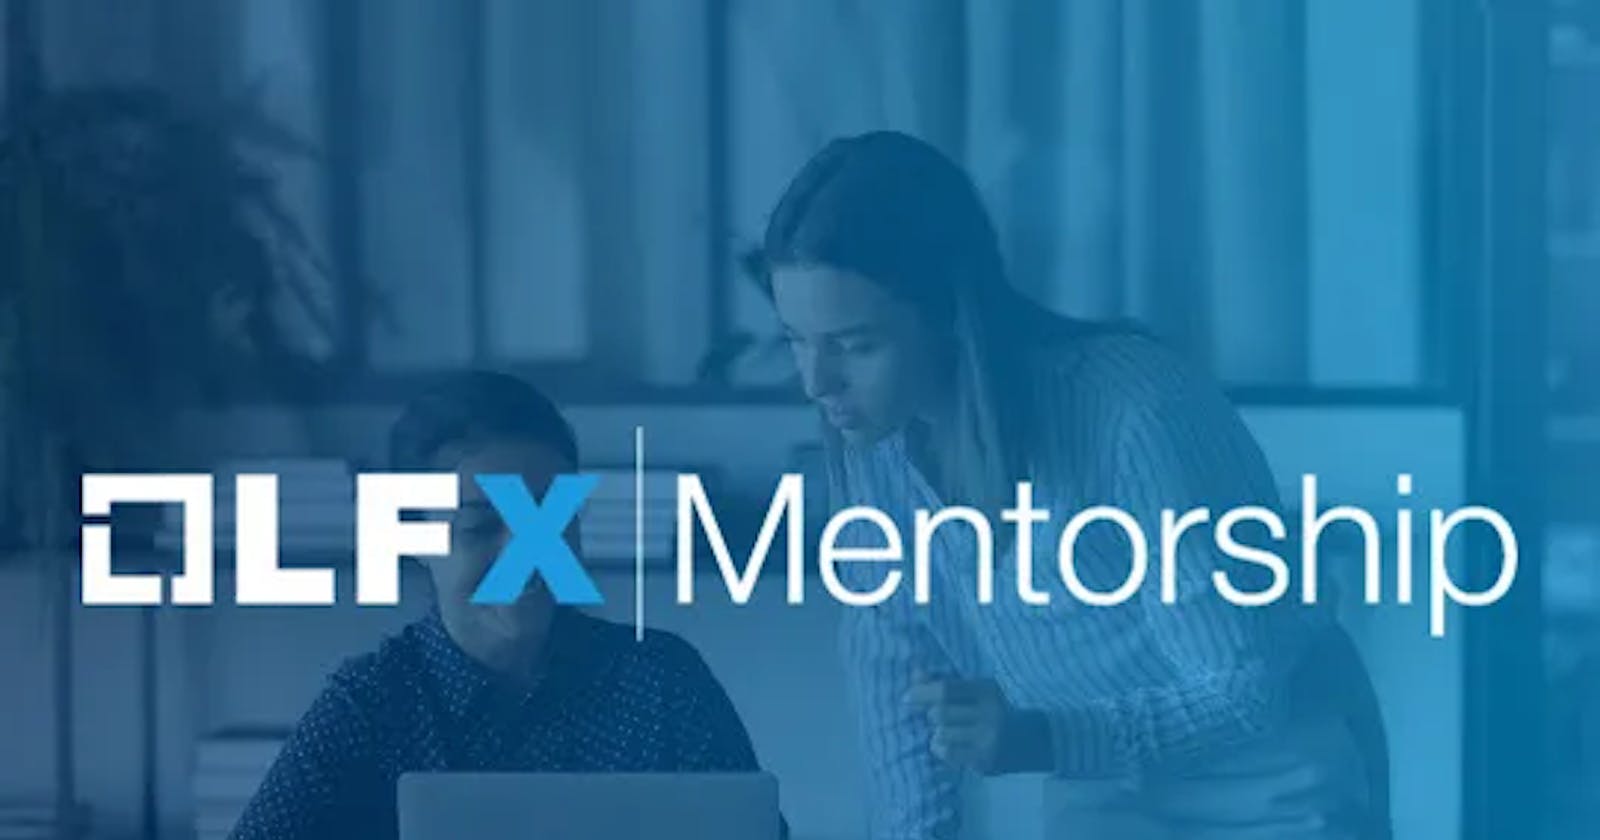 LFX Mentorship: How to Get Selected